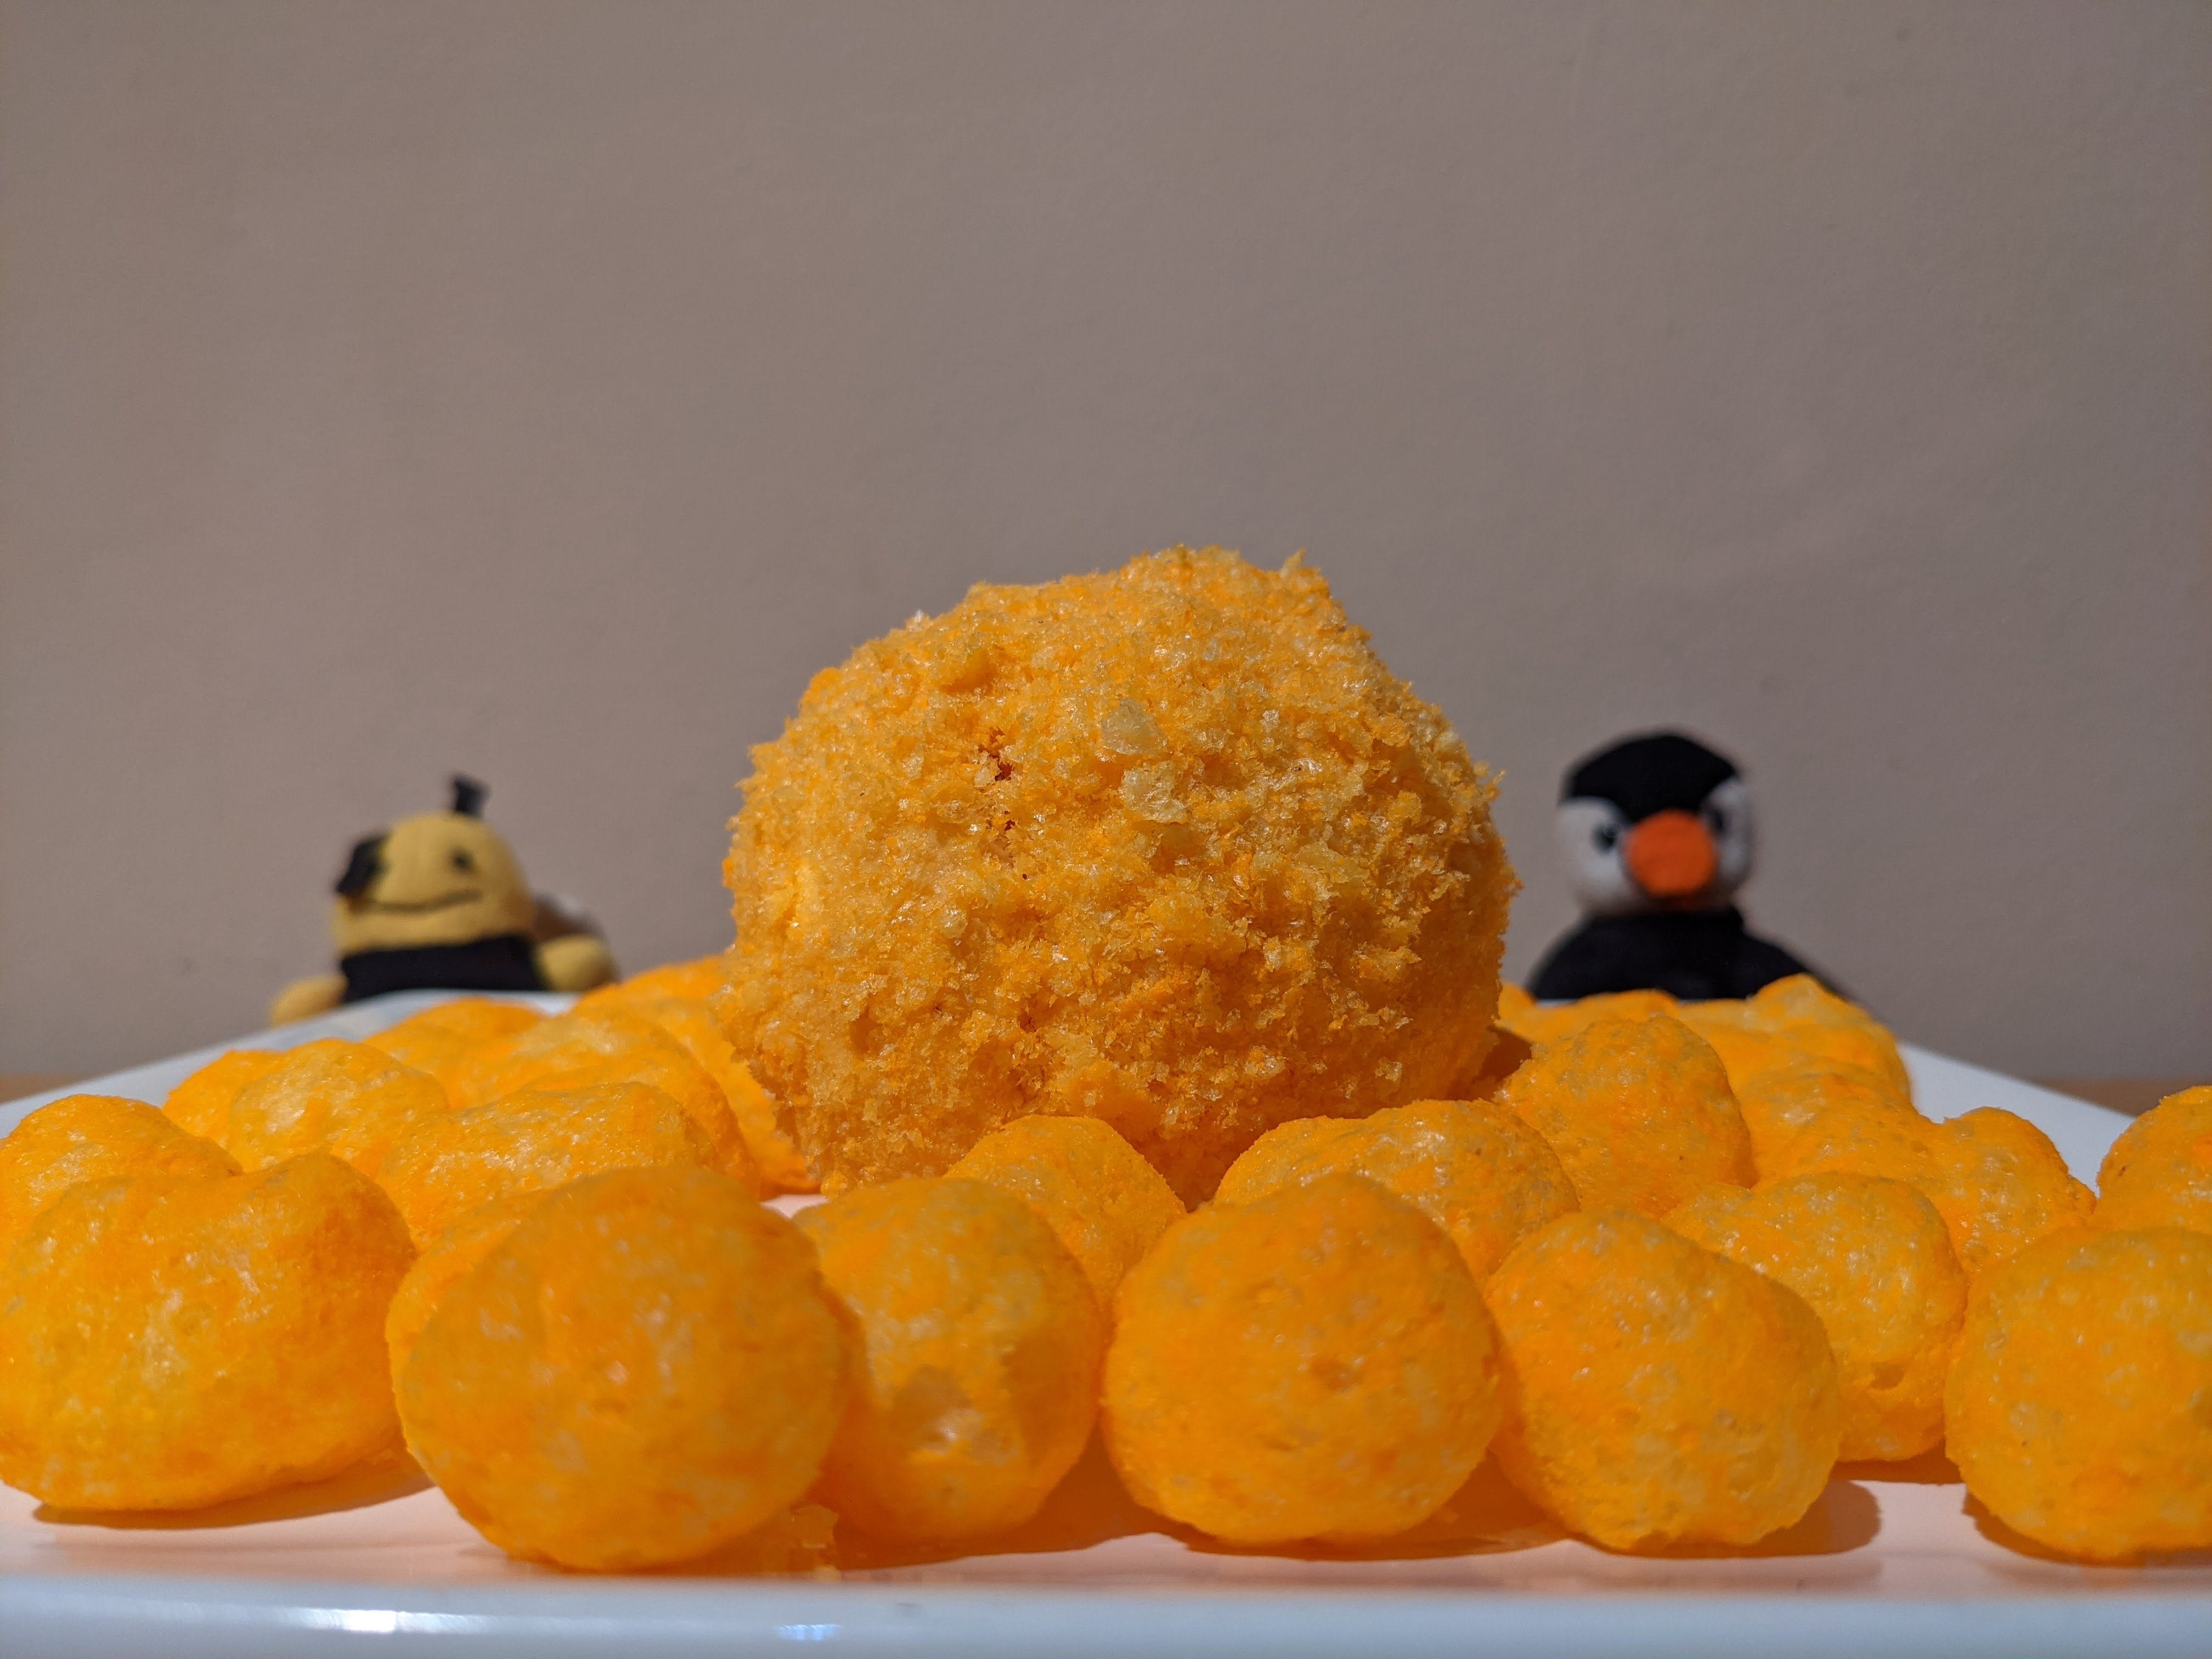 The cheese ball cheese ball - by Dennis Lee